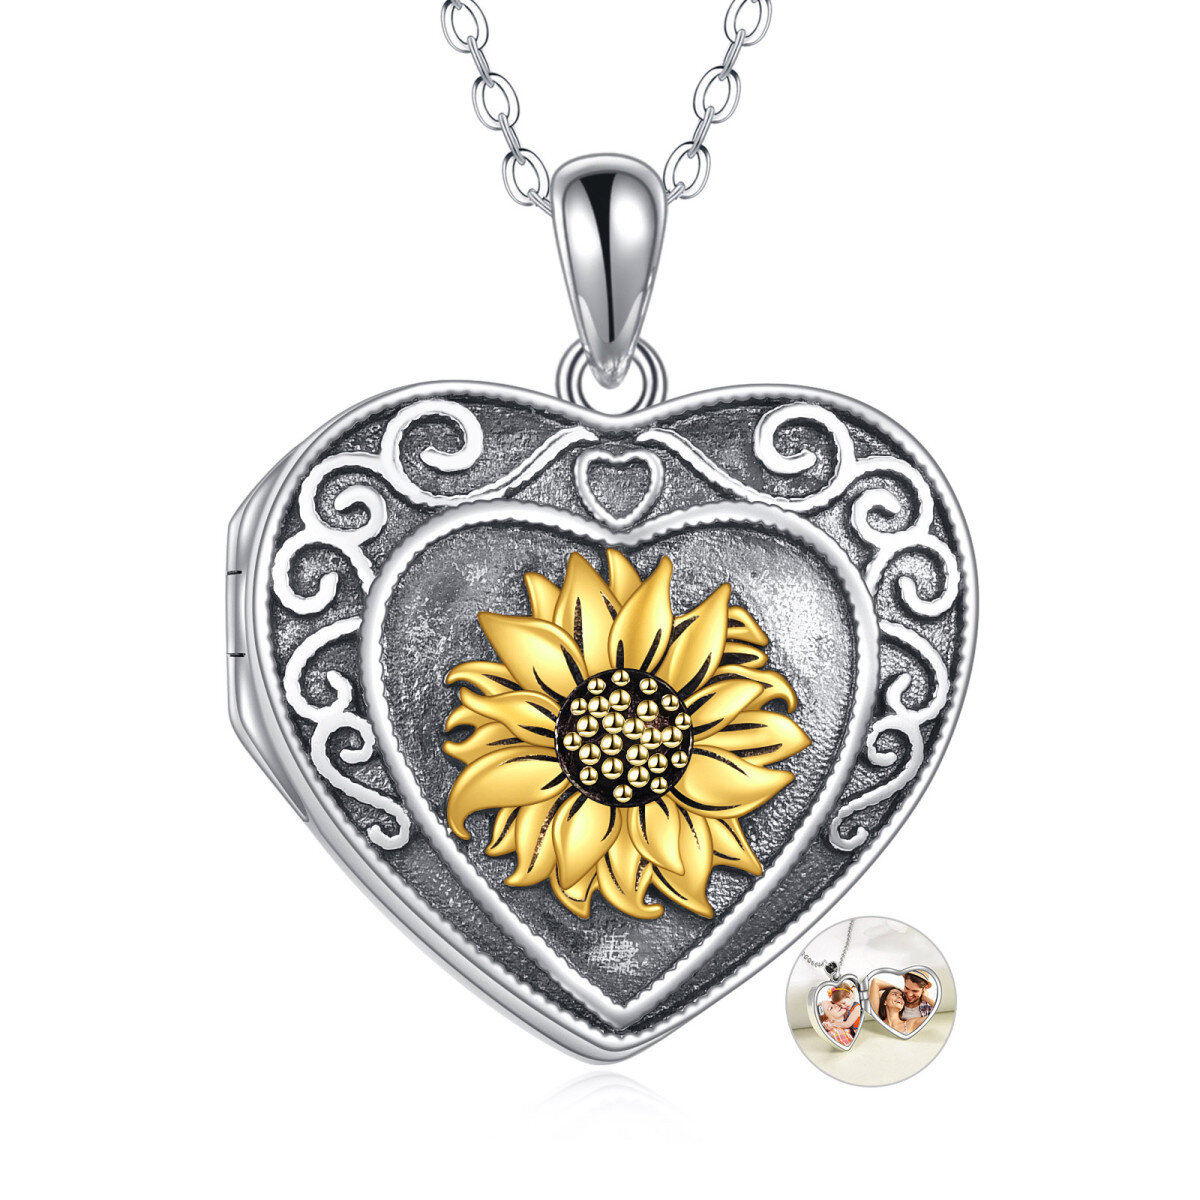 Sterling Silver Sunflower & Heart Personalized Photo Locket Necklace with Engraved Word-1